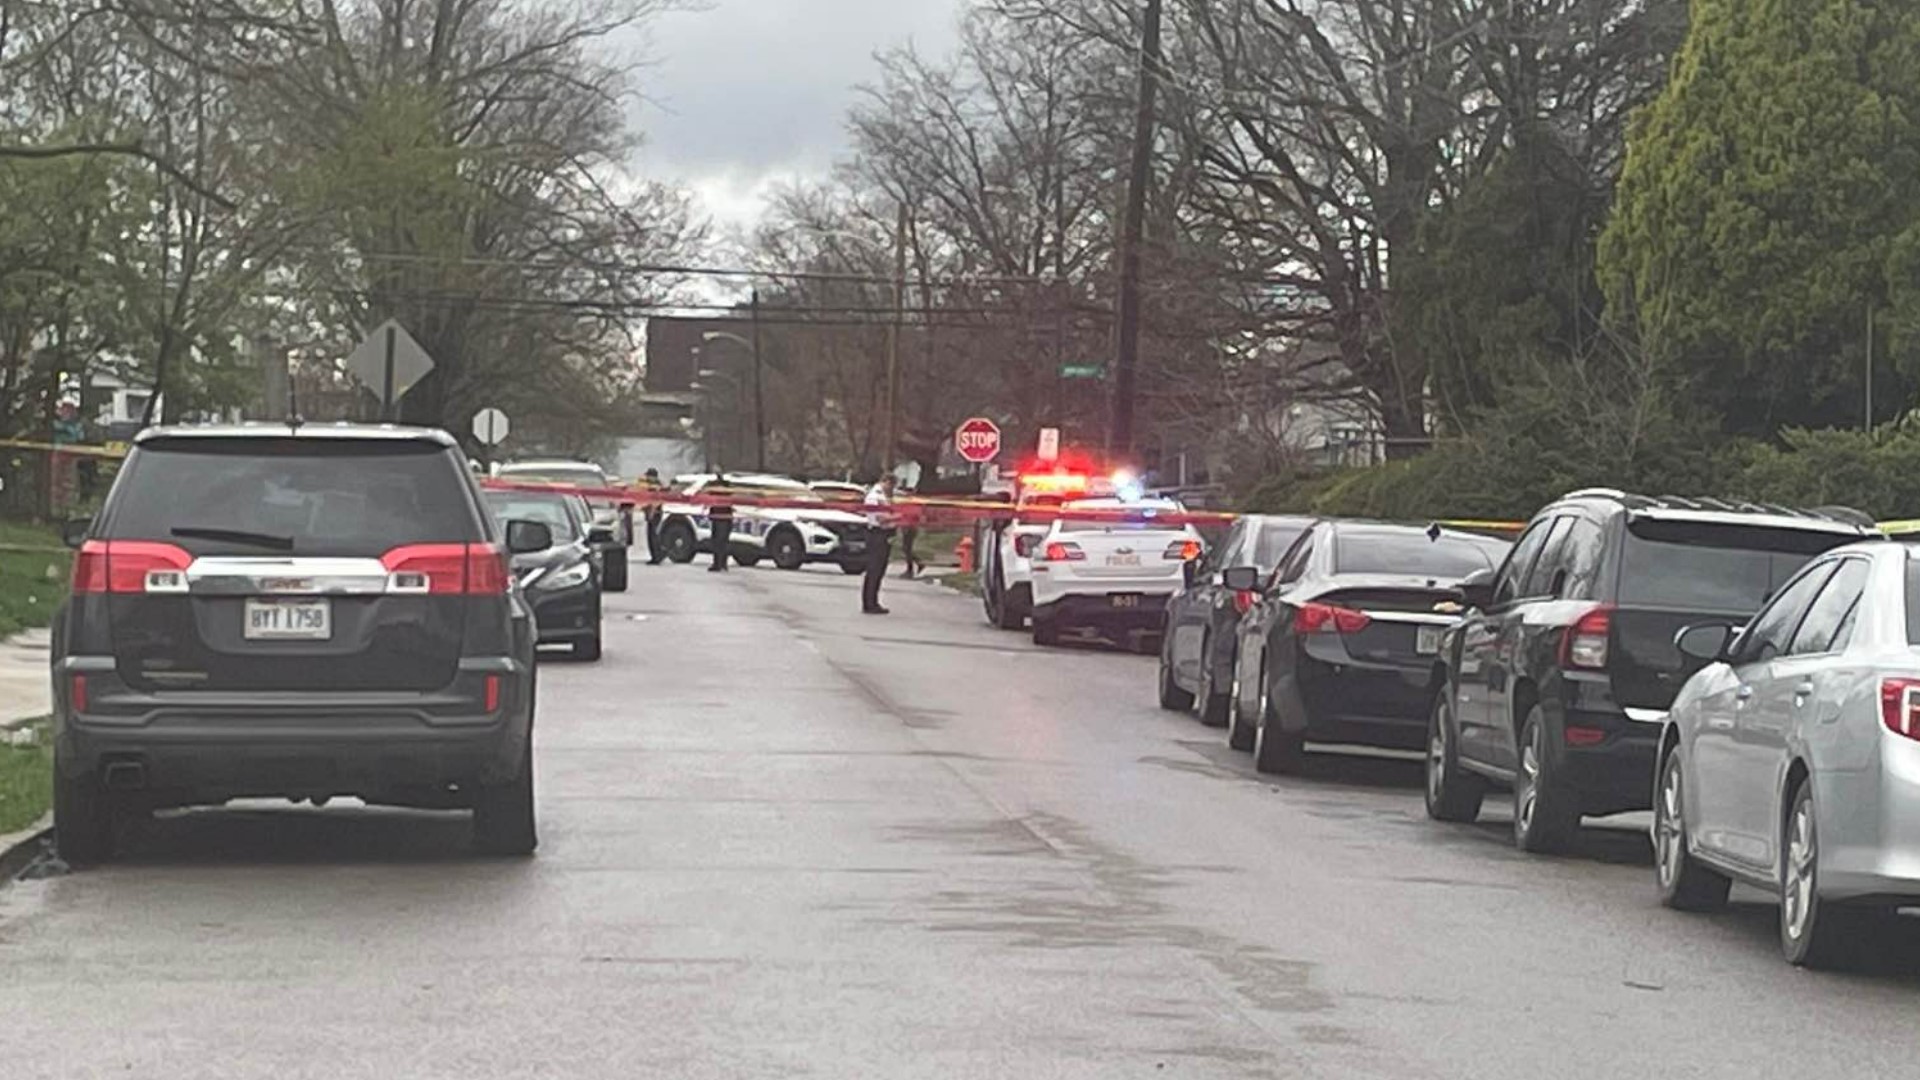 Police say a preliminary investigation reveals that a fight happened between the two men on East 21st Avenue that resulted in gunfire.